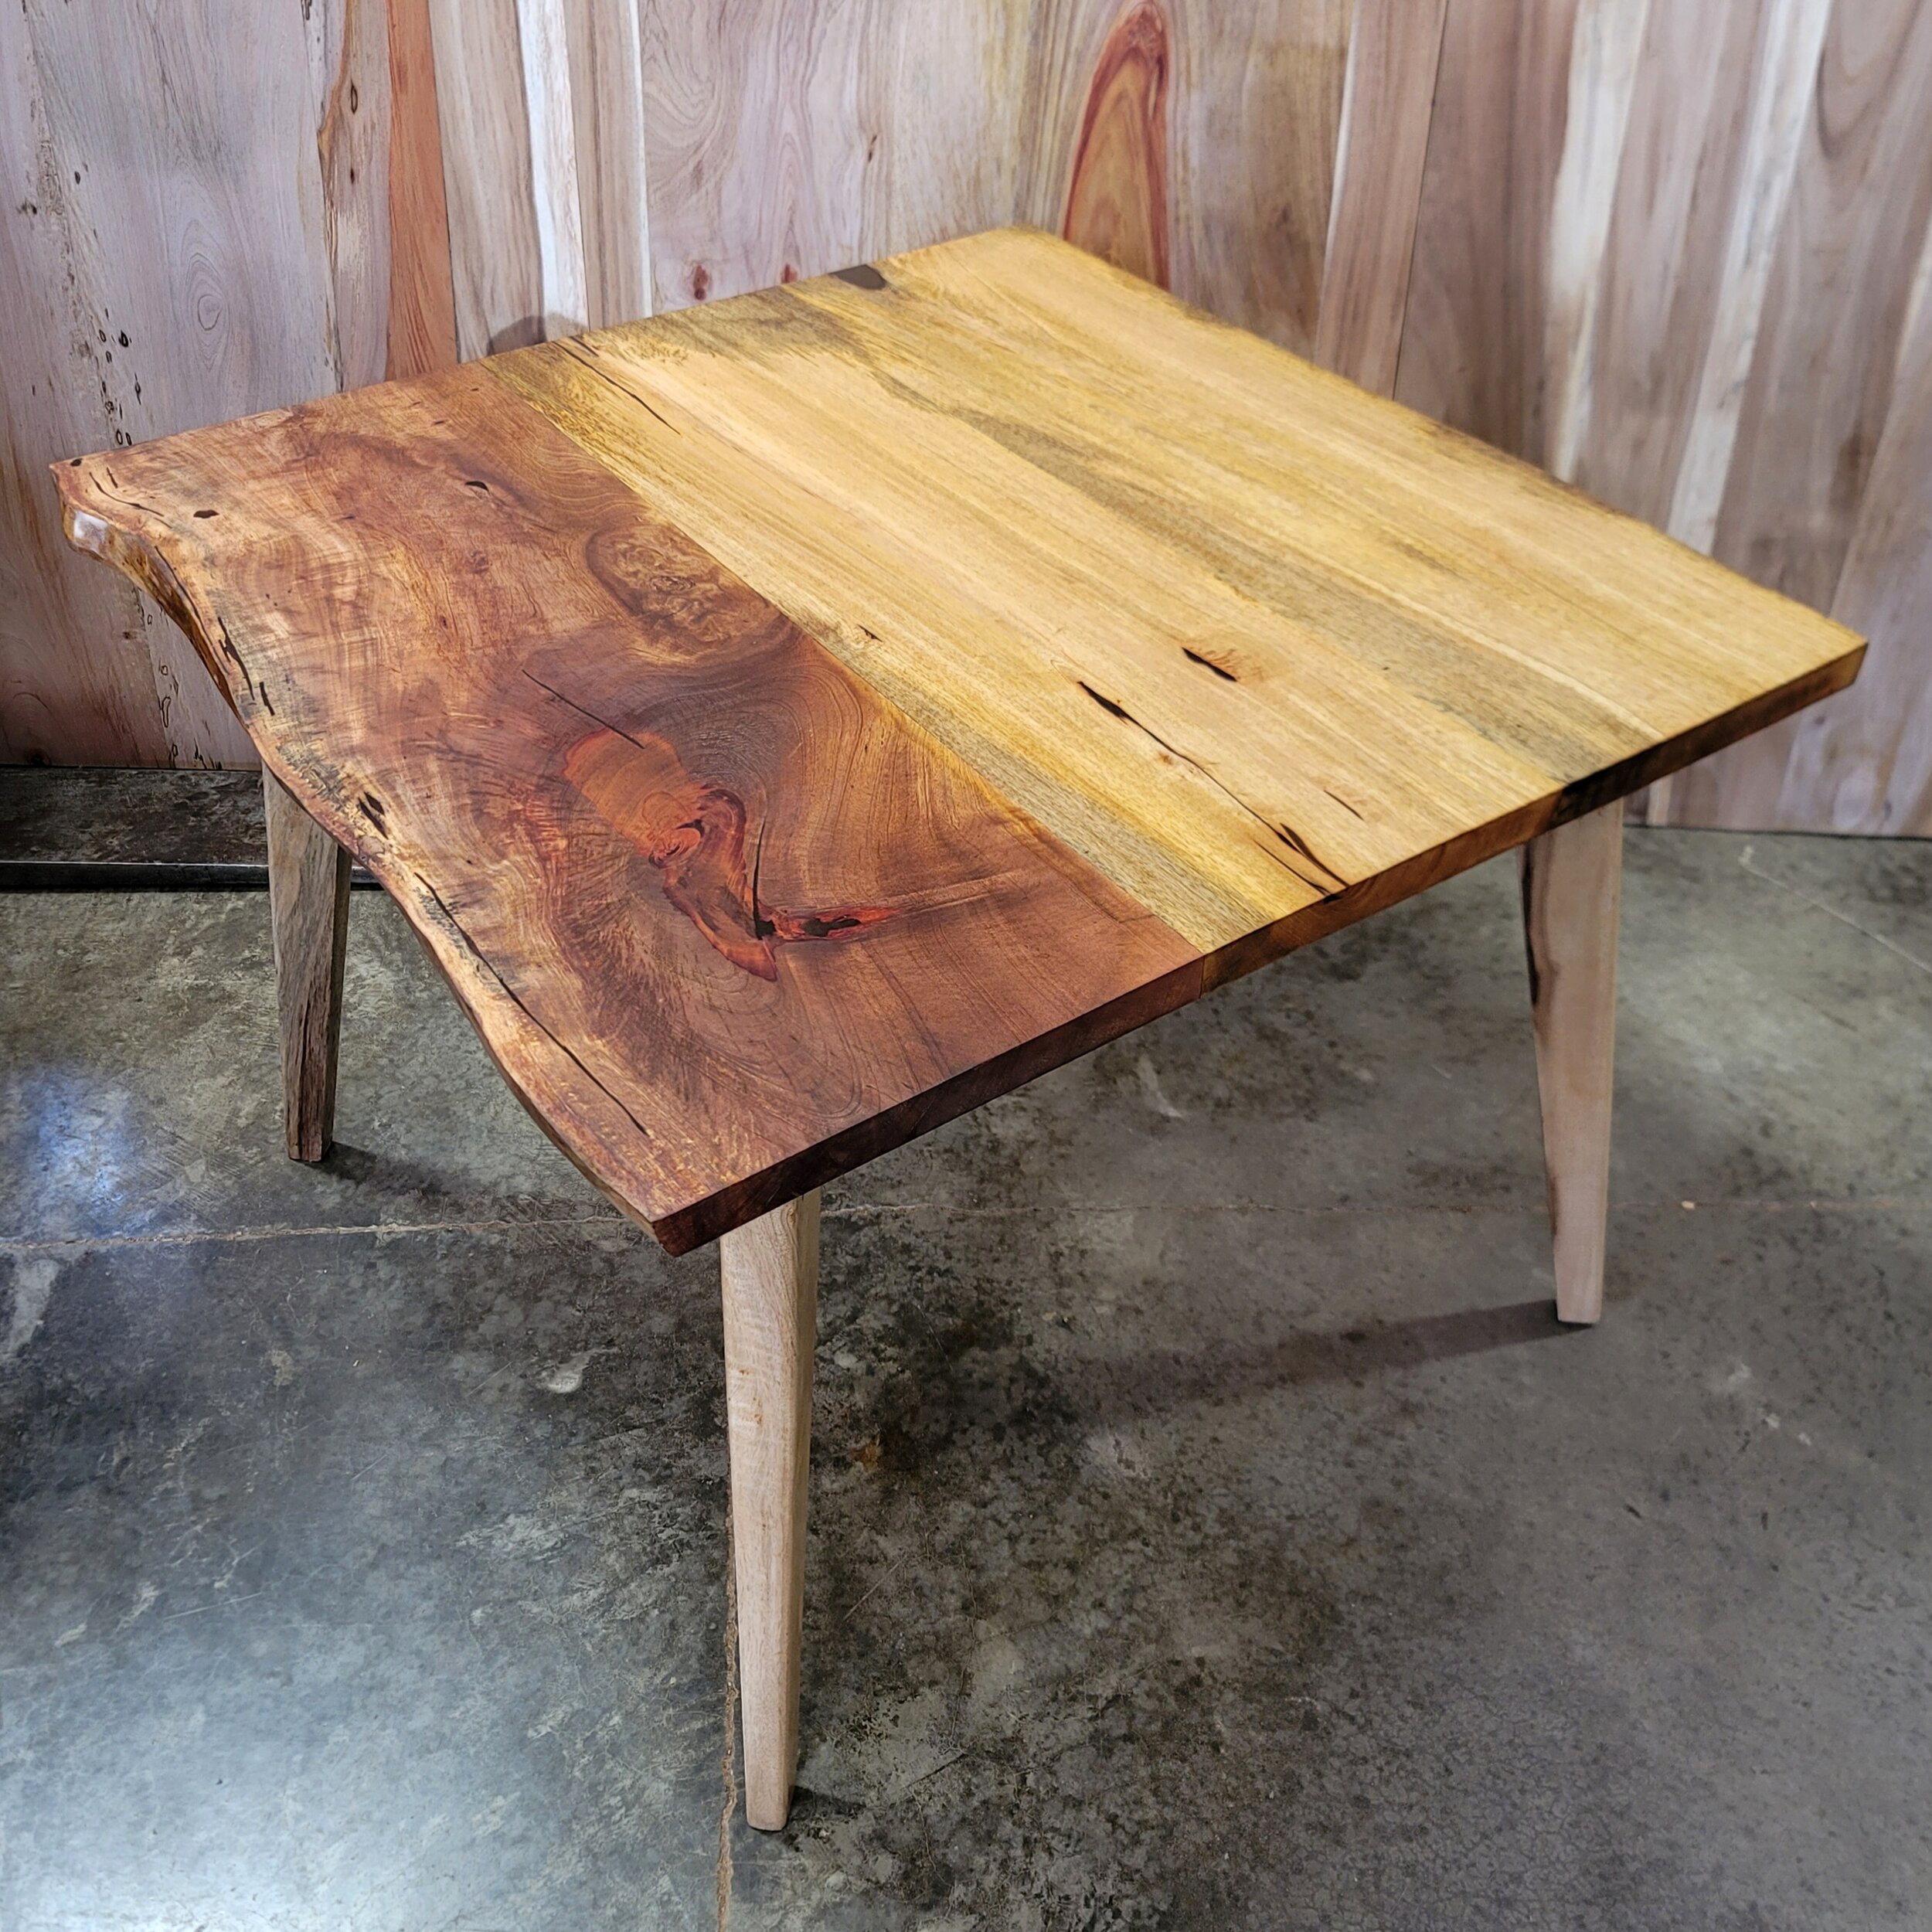 Pith Square Table (gallery 2).jpg